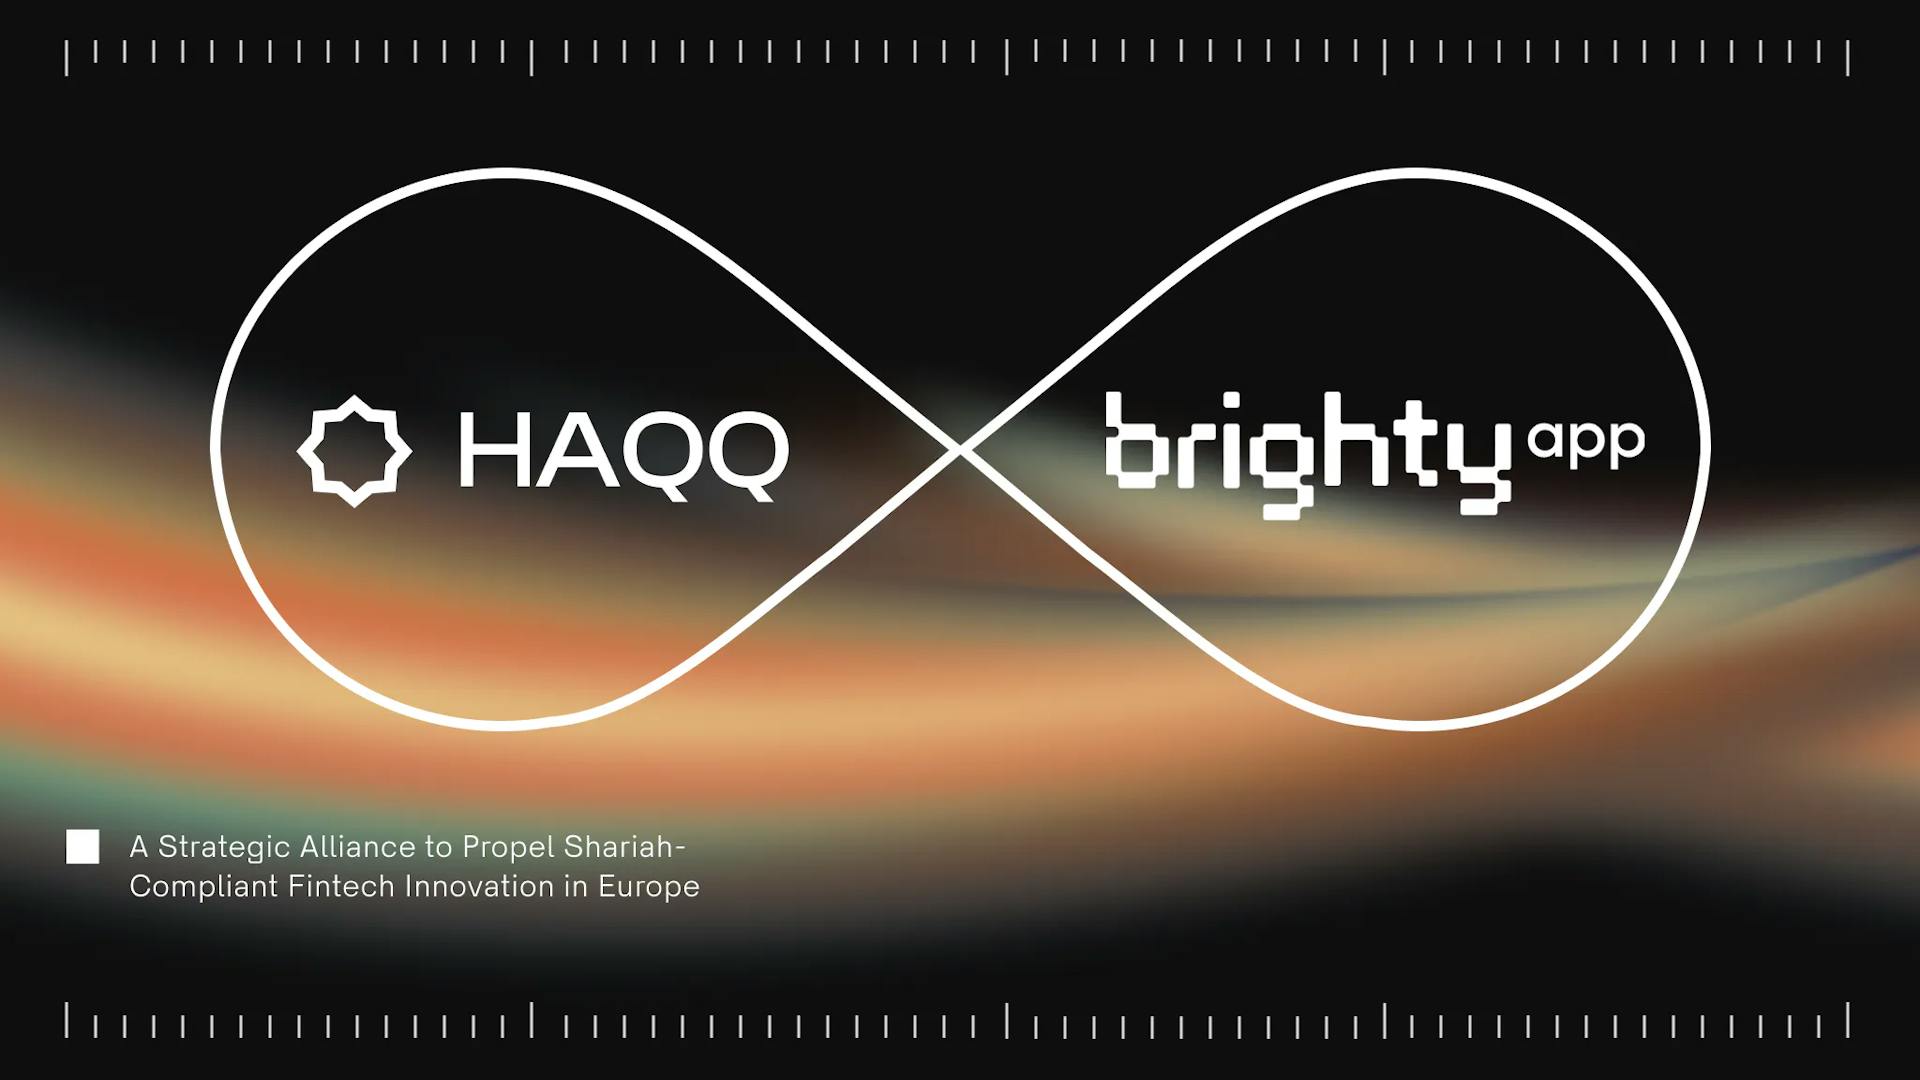 HAQQ strengthens presence in Europe with Brighty App partnership